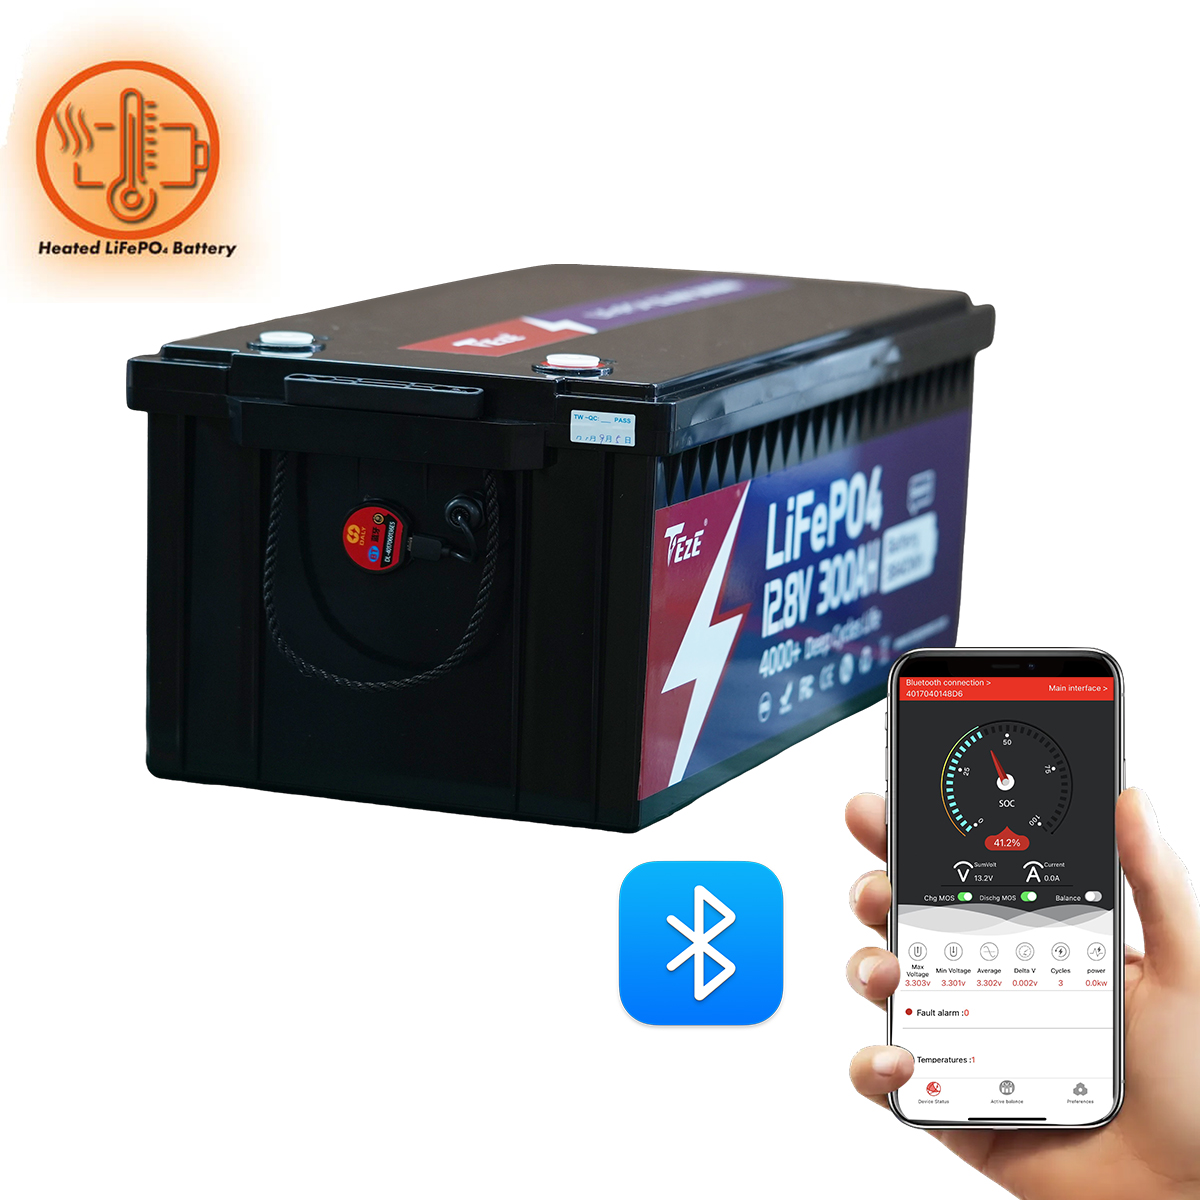 NEW-TezePower 12V300Ah LiFePO4 Battery with Bluetooth, Self-heating and Active Balancer, Built-in 200A Daly BMS (Bluetooth External Version)-TezePower